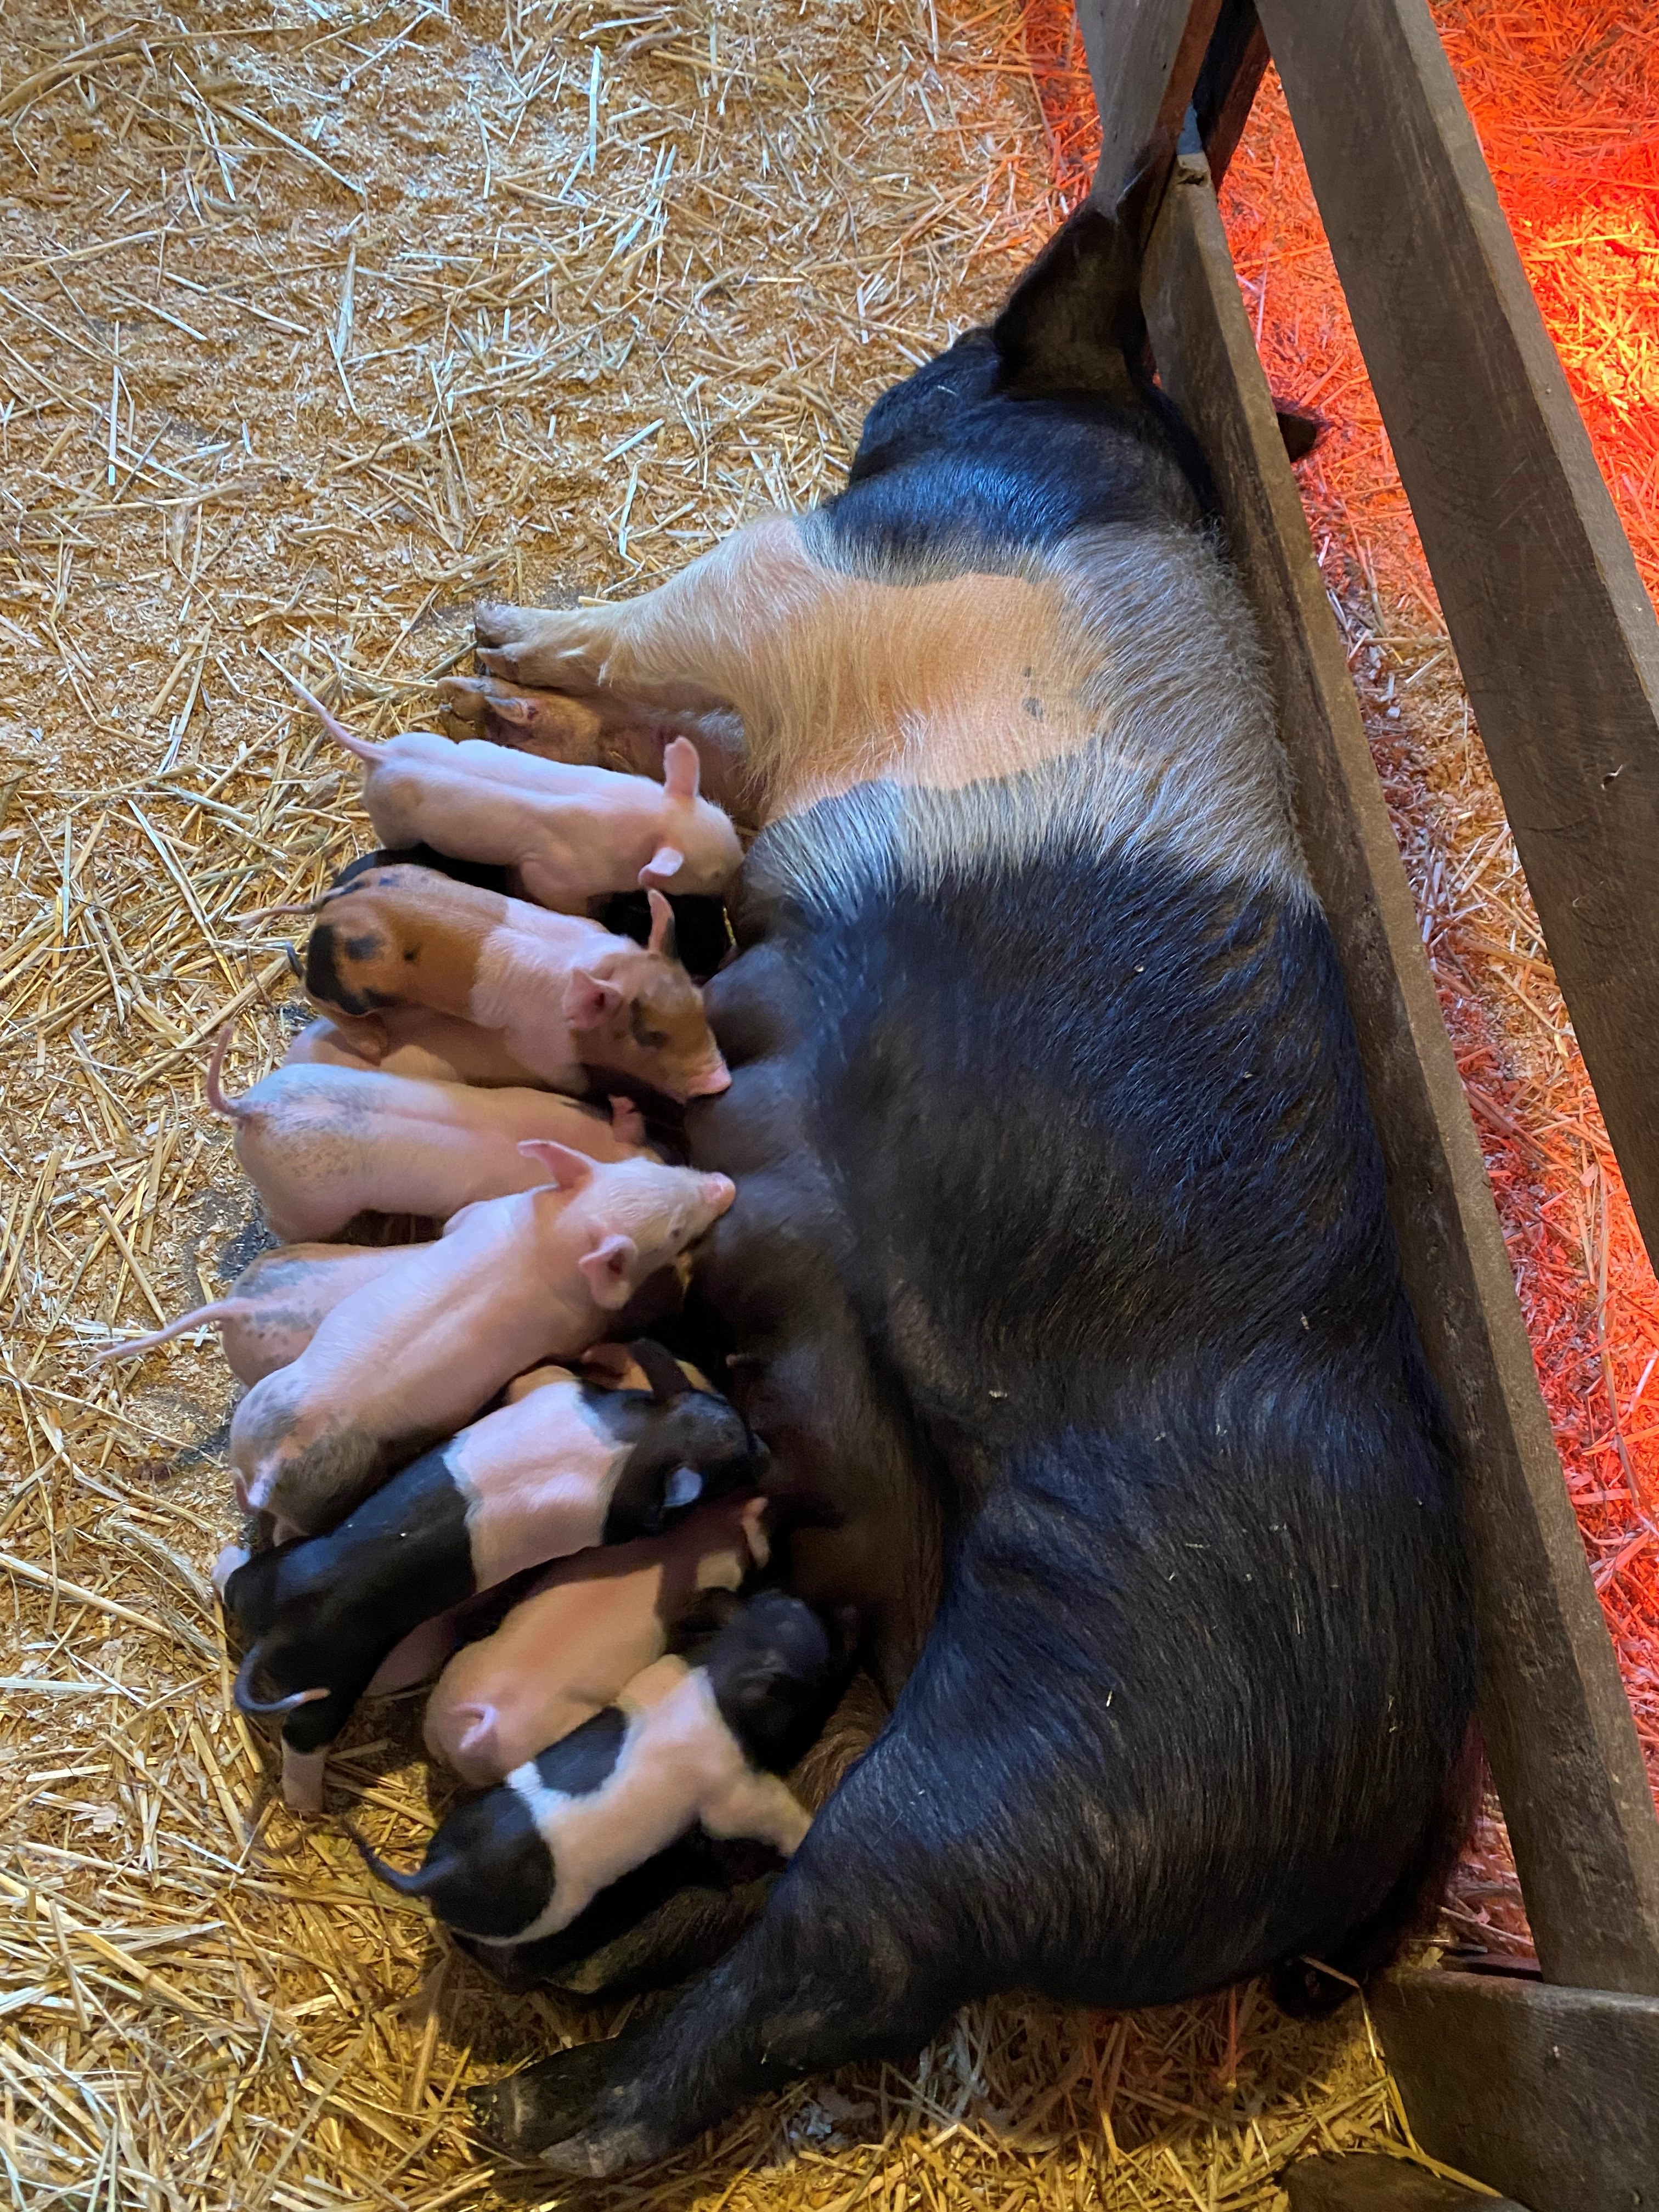 Nike, a Hampshire Cross sow, delivered her first litter of piglets